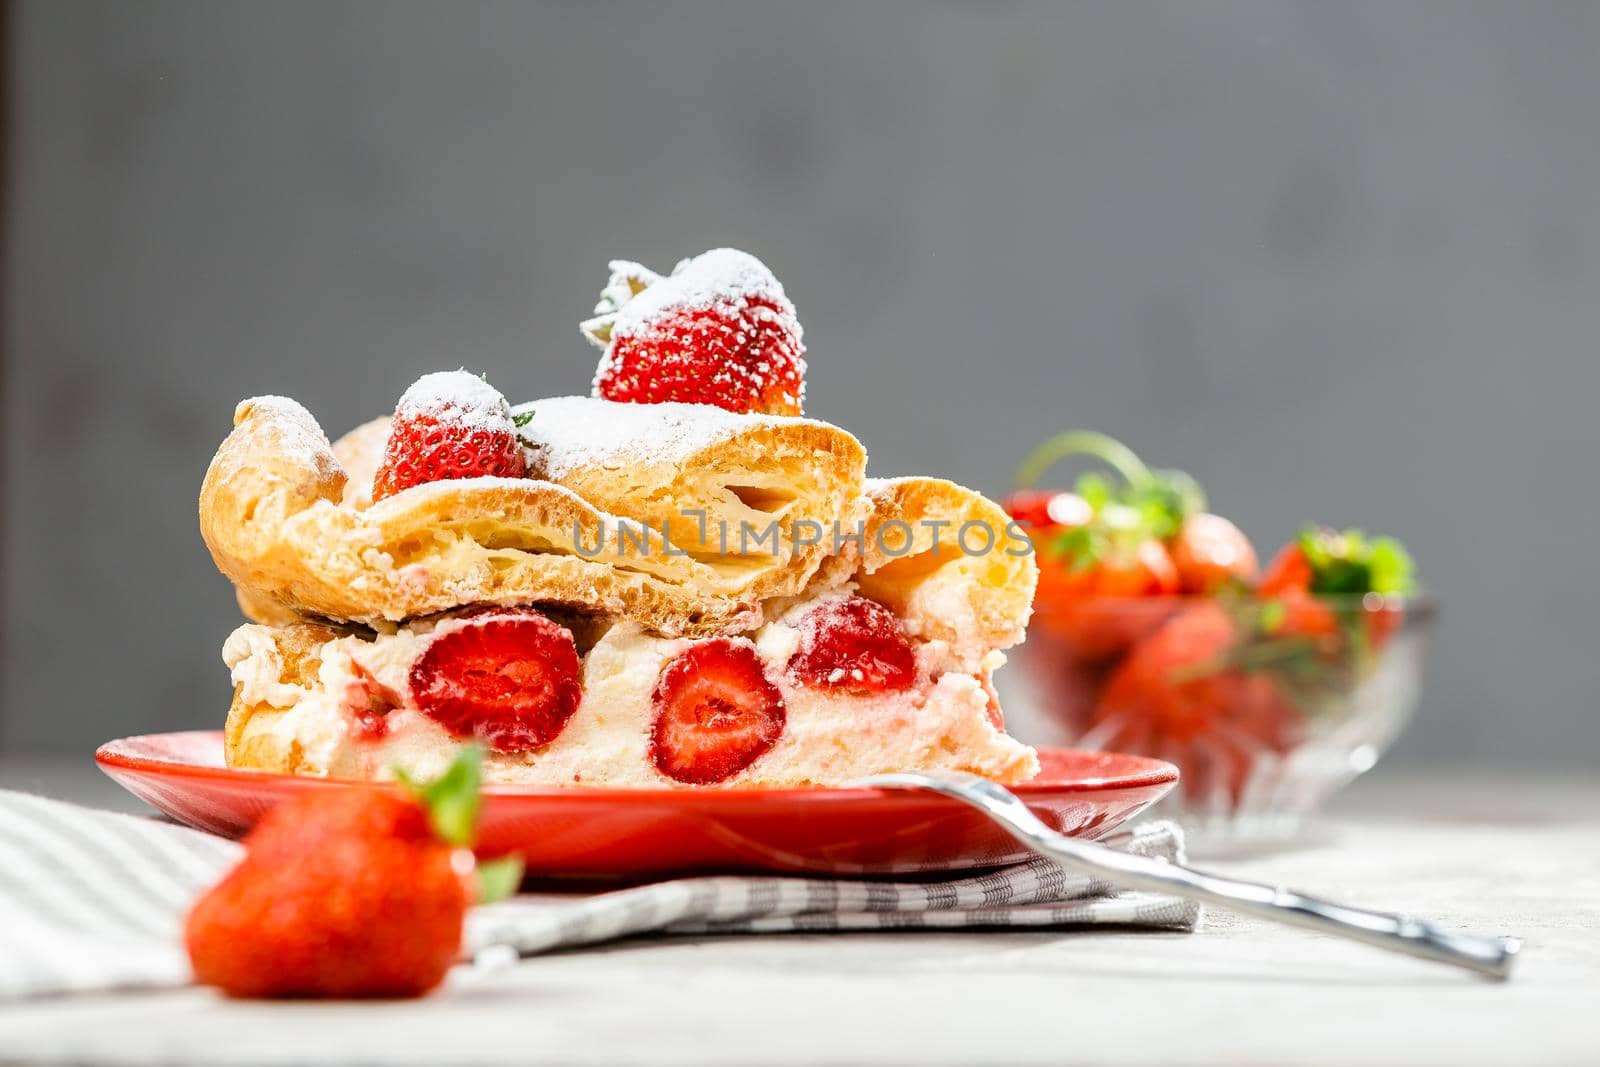 A piece of strawberry cake on a red plate iced with sugar powder over grey background